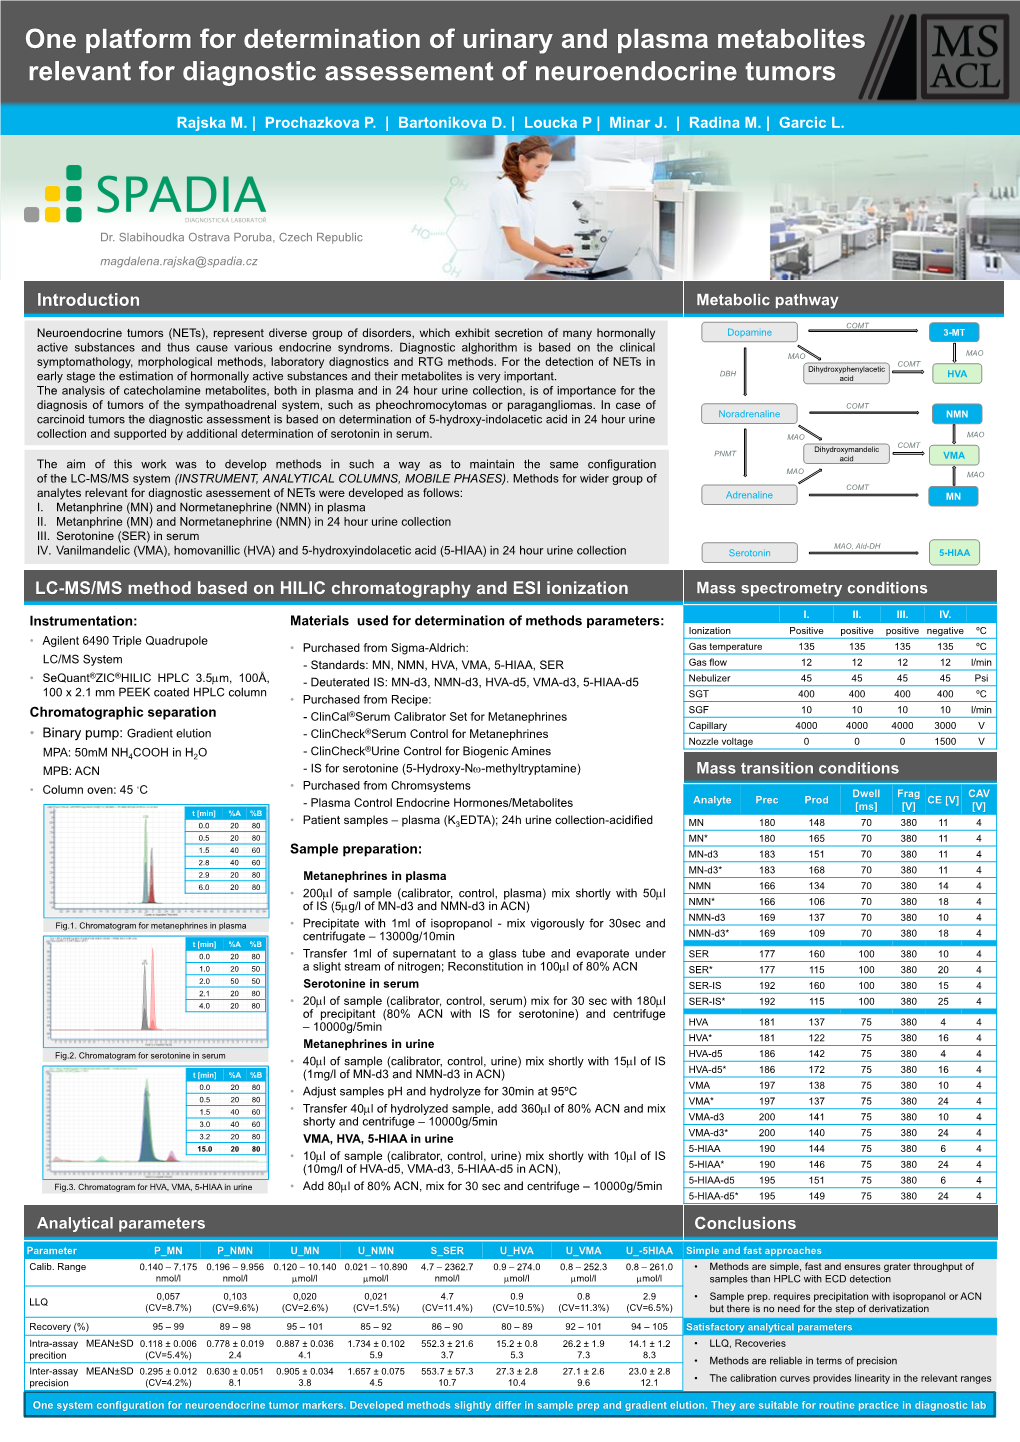 One Platform for Determination of Urinary and Plasma Metabolites Relevant for Diagnostic Assessement of Neuroendocrine Tumors This Poster Is 48” Wide By